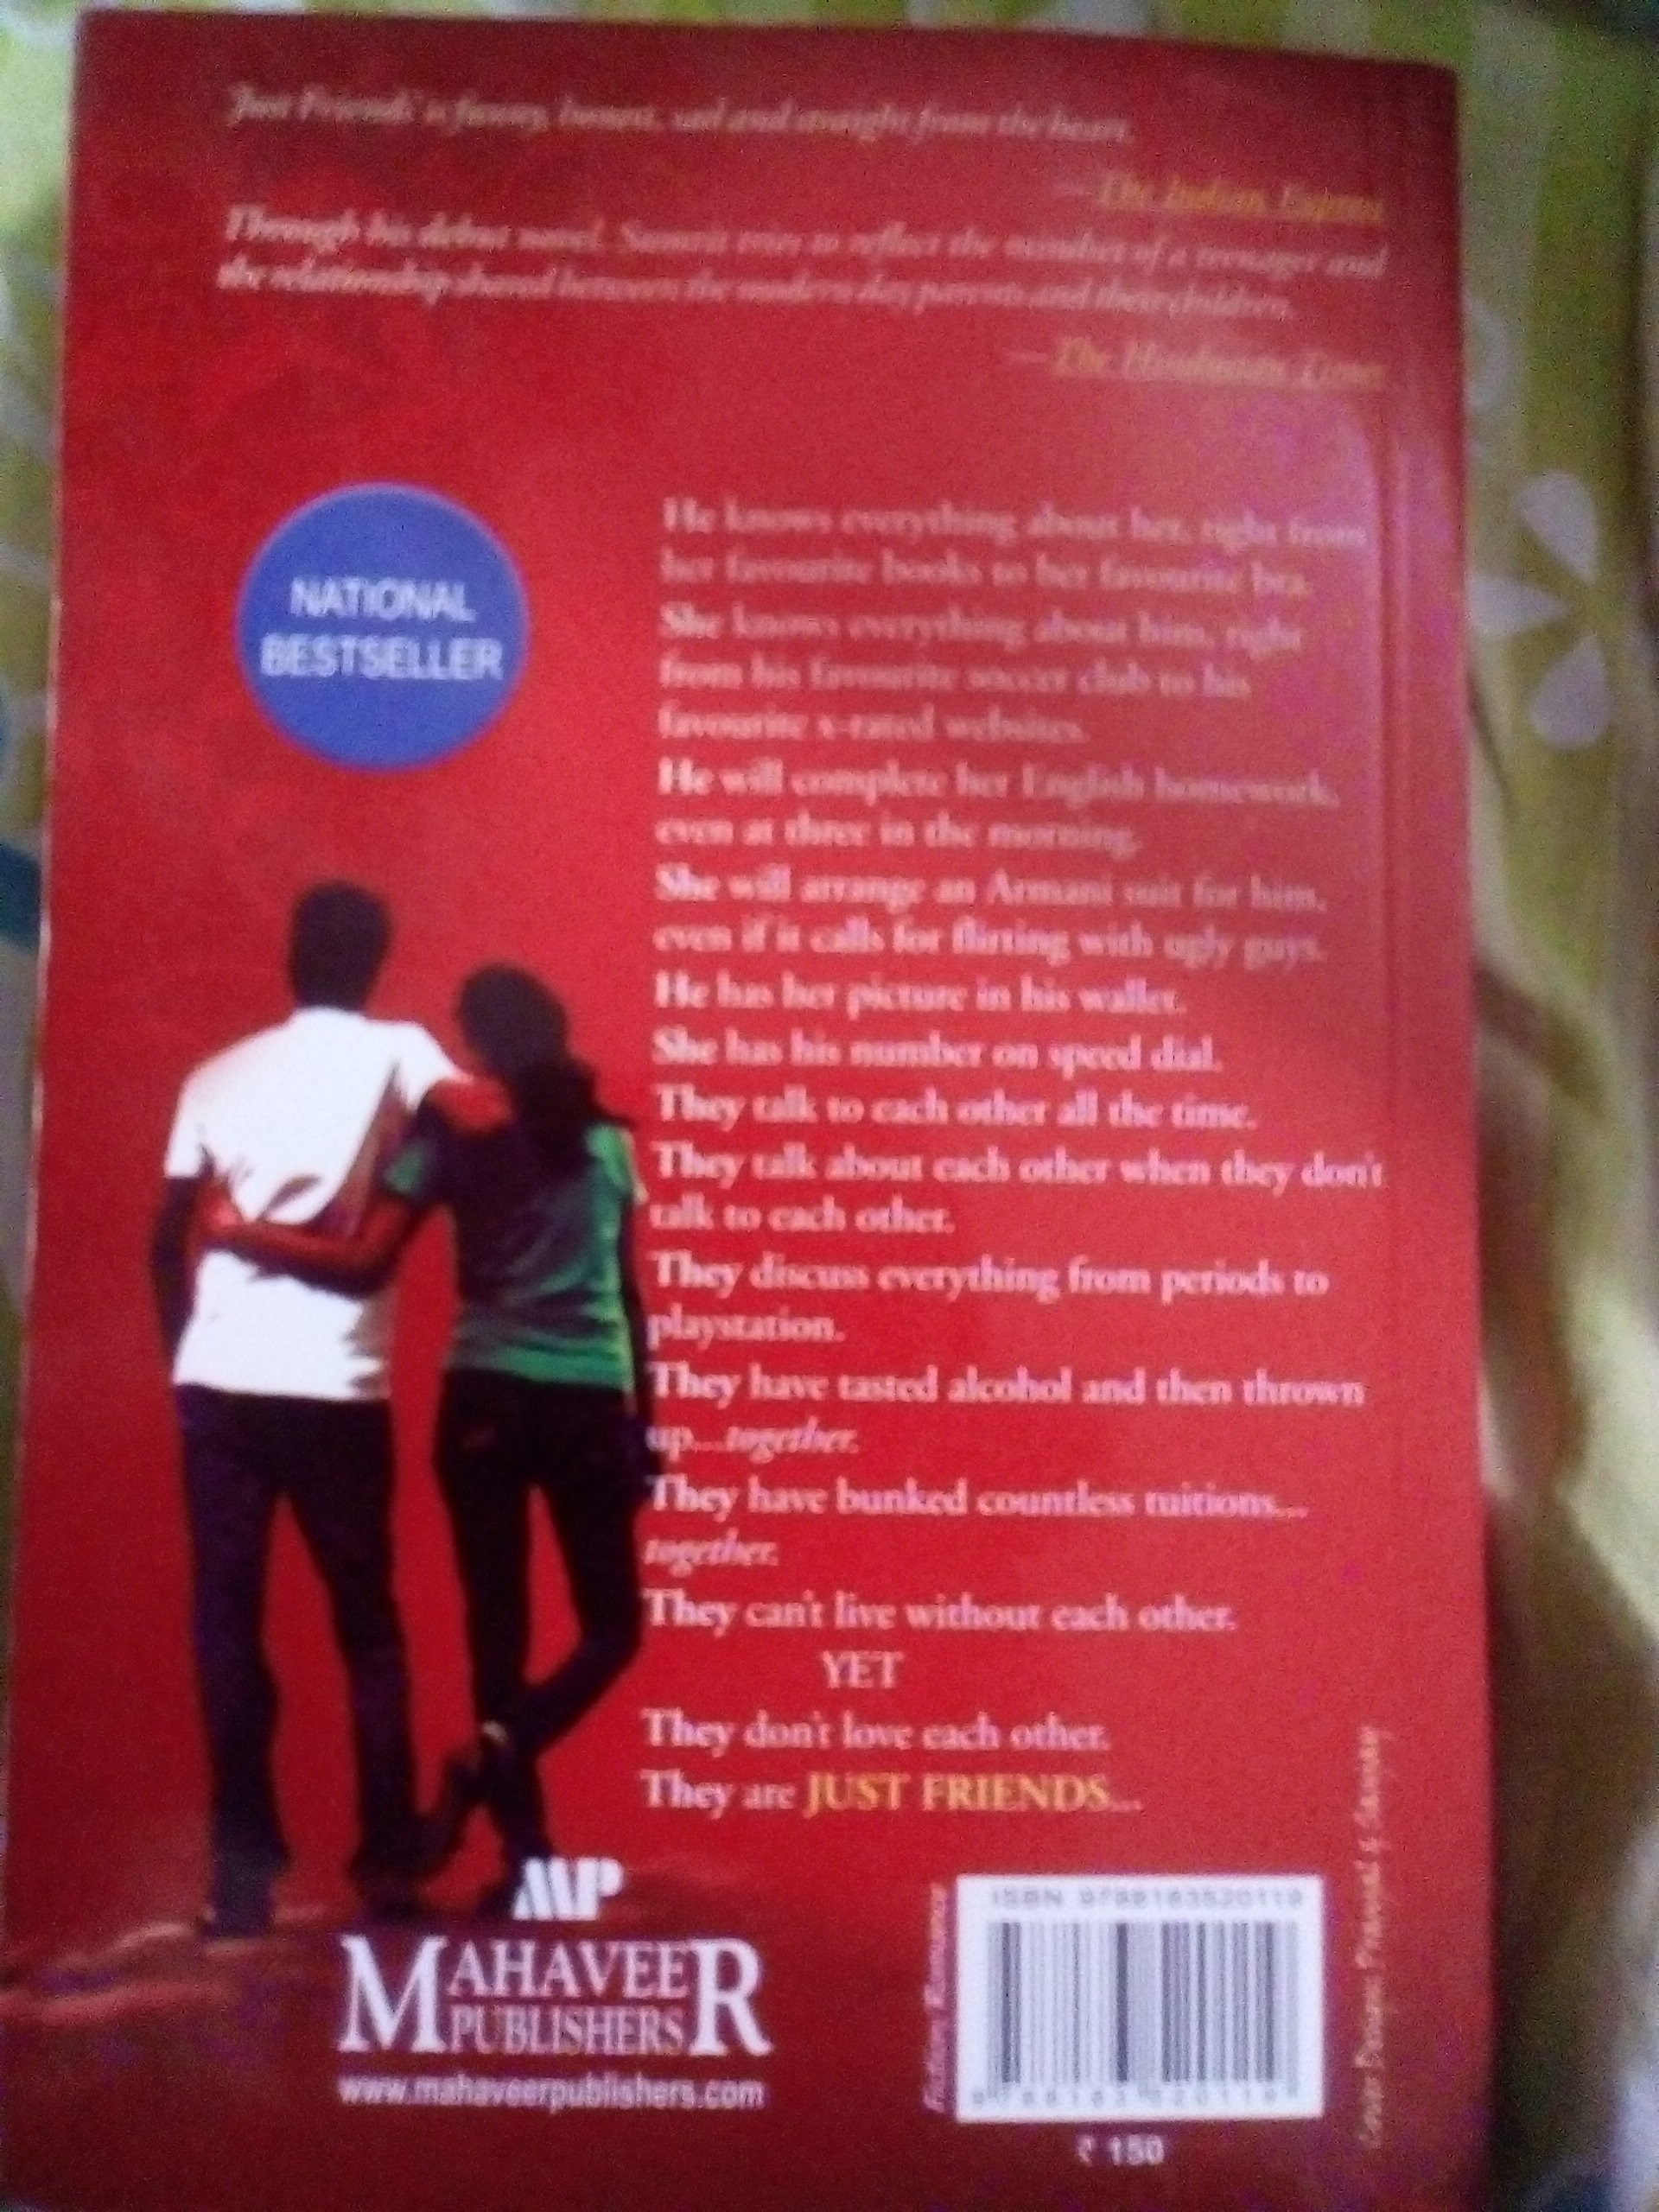 just friends by sumrit shahi pdf